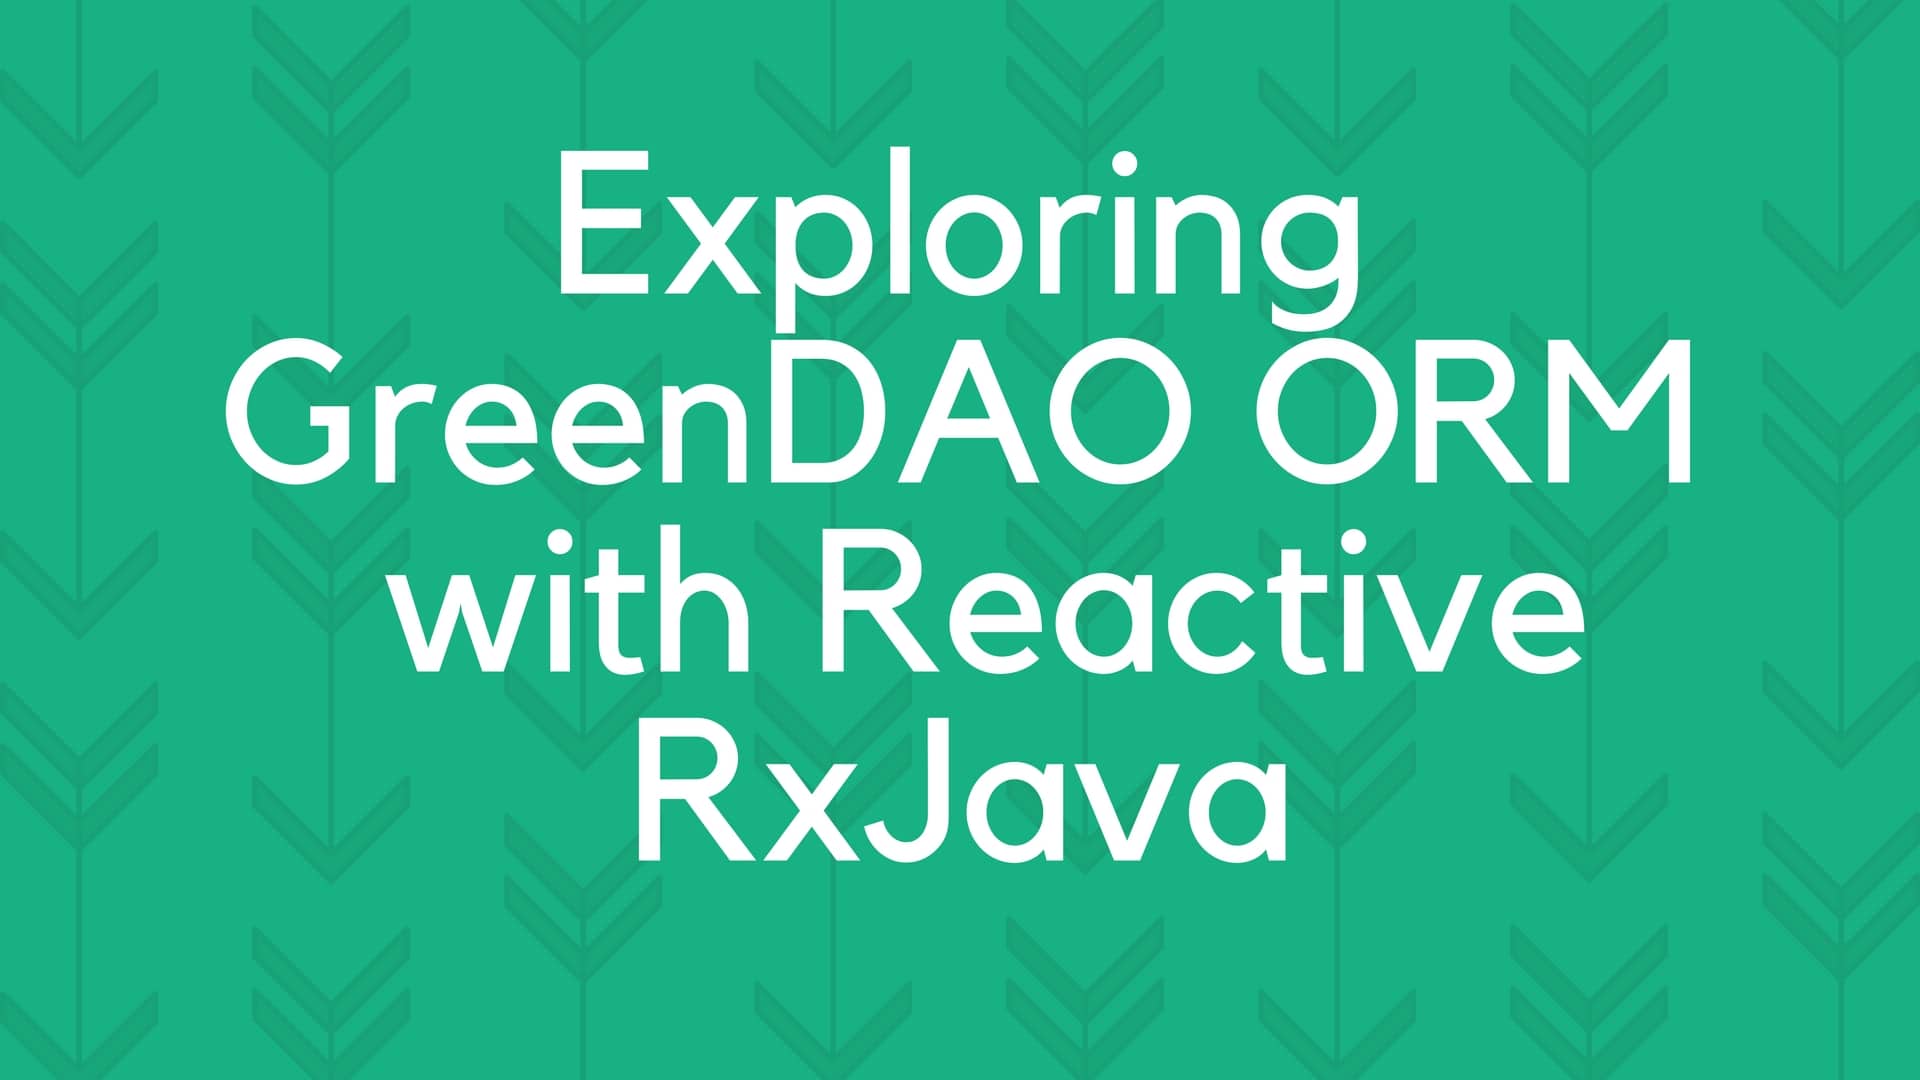 Exploring GreenDAO ORM database with Reactive RxJava in Android